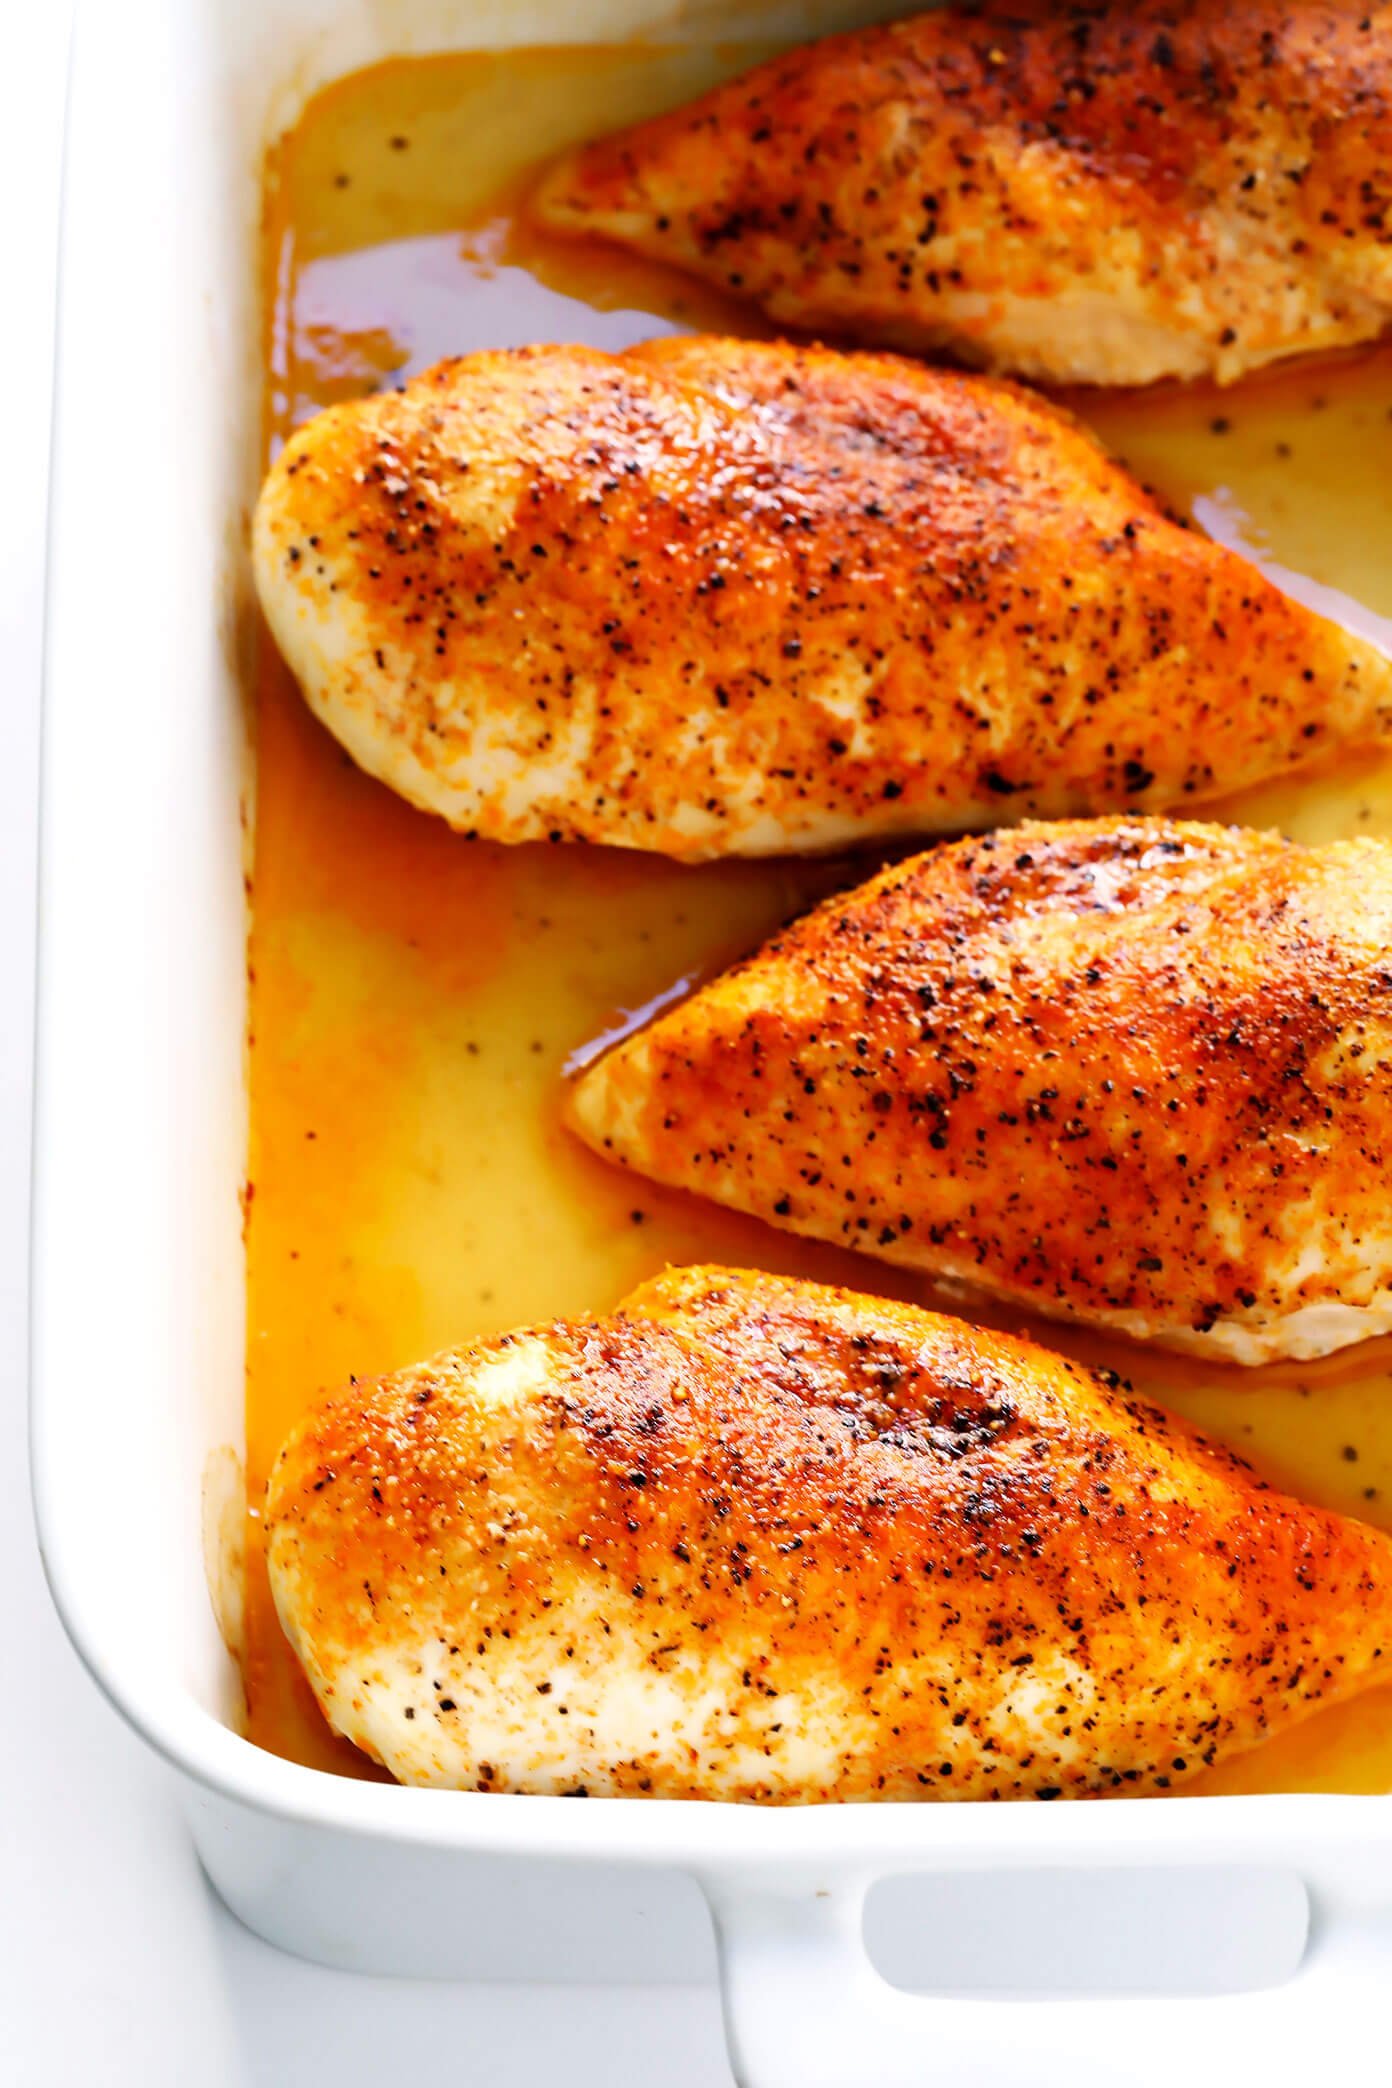 Baked Chicken Breast Gimme Some Oven,Lunches For Kids